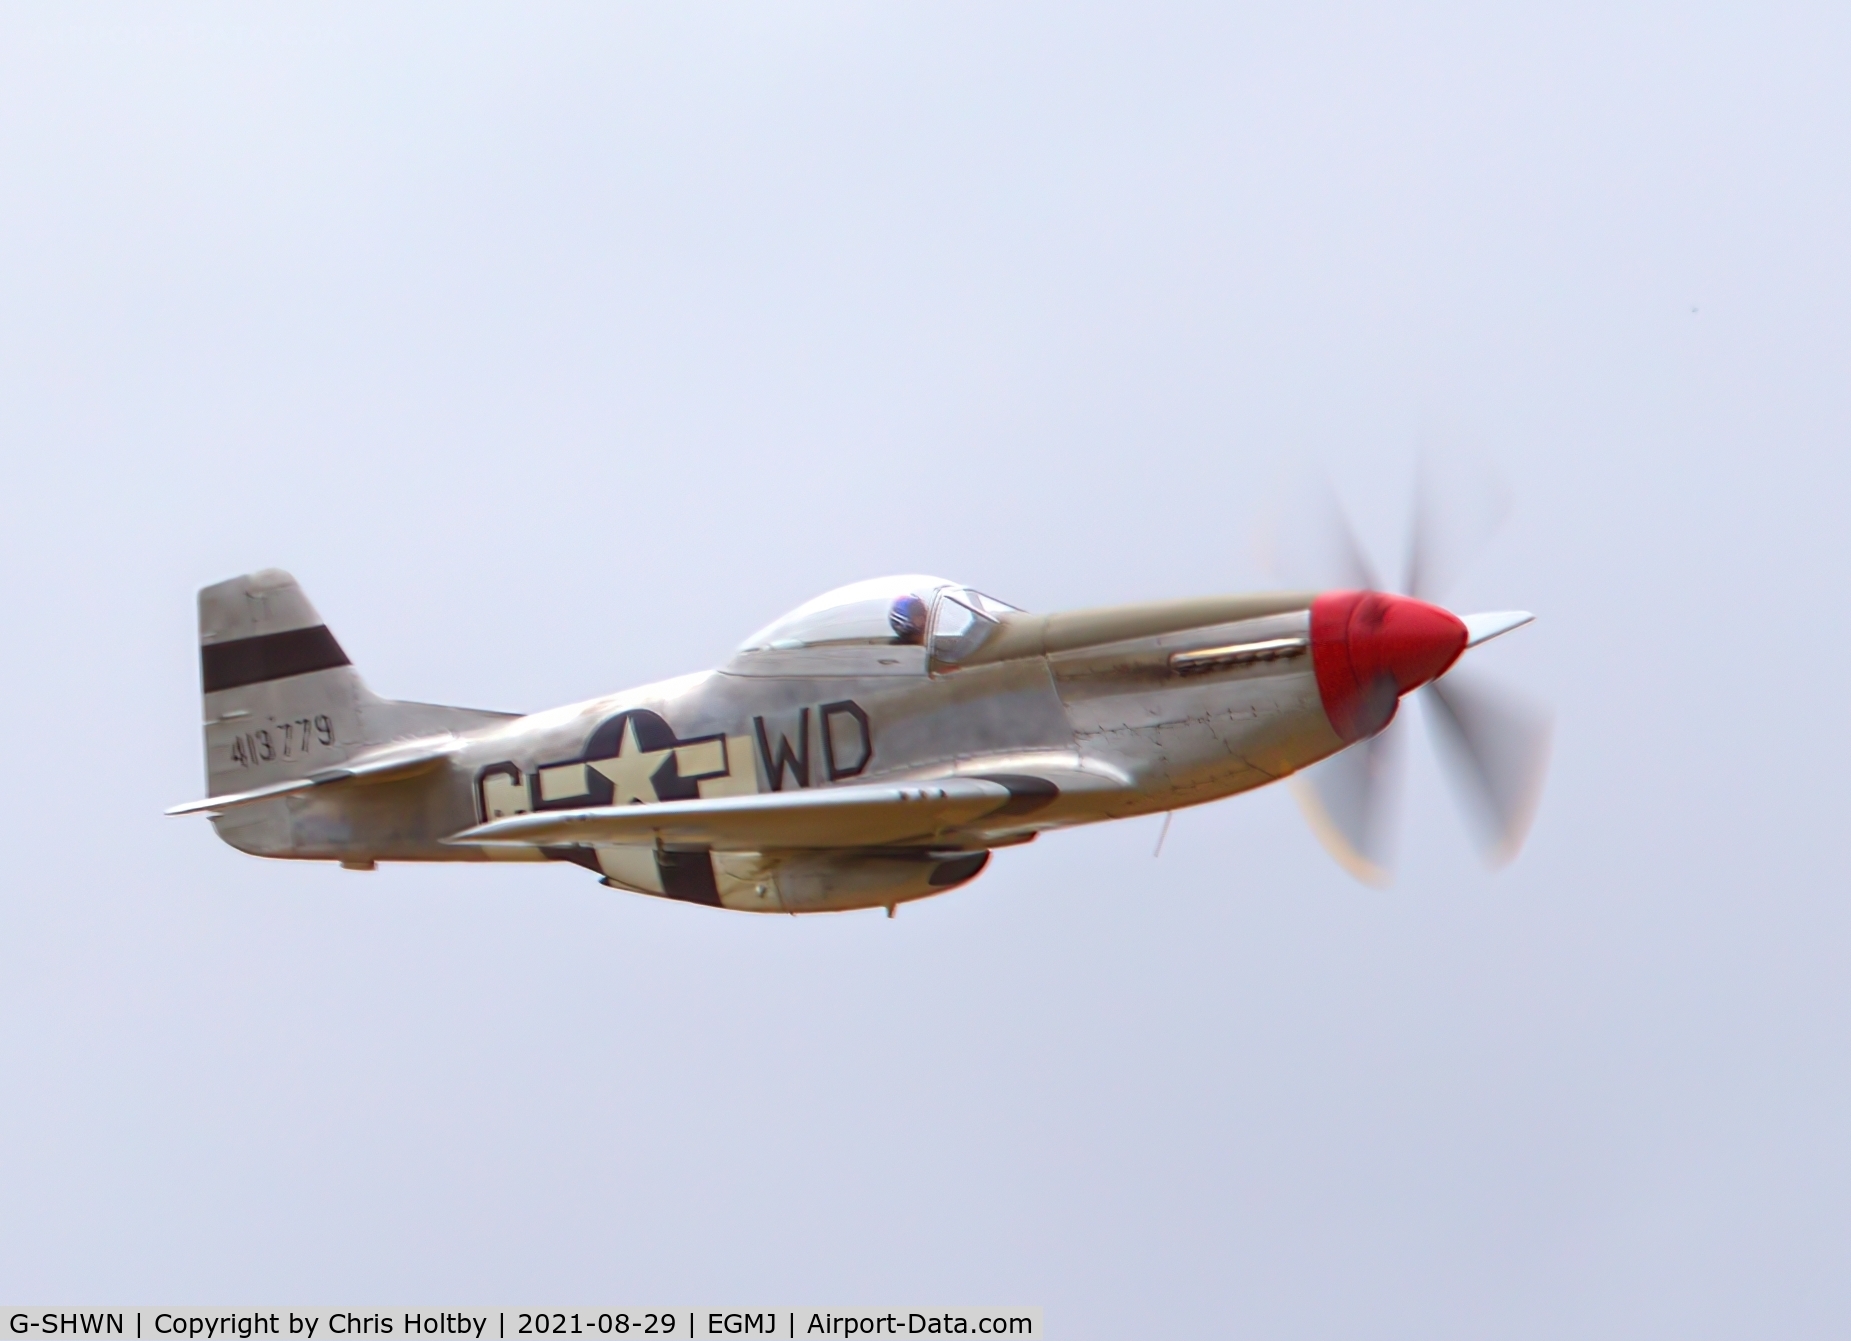 G-SHWN, 1944 North American P-51D Mustang C/N 122-40417, In her new livery having changed from RAF Sharkmouth 4473877 scheme. It displayed with Spitfire G-RRGN at the Little Gransden Airshow 2021